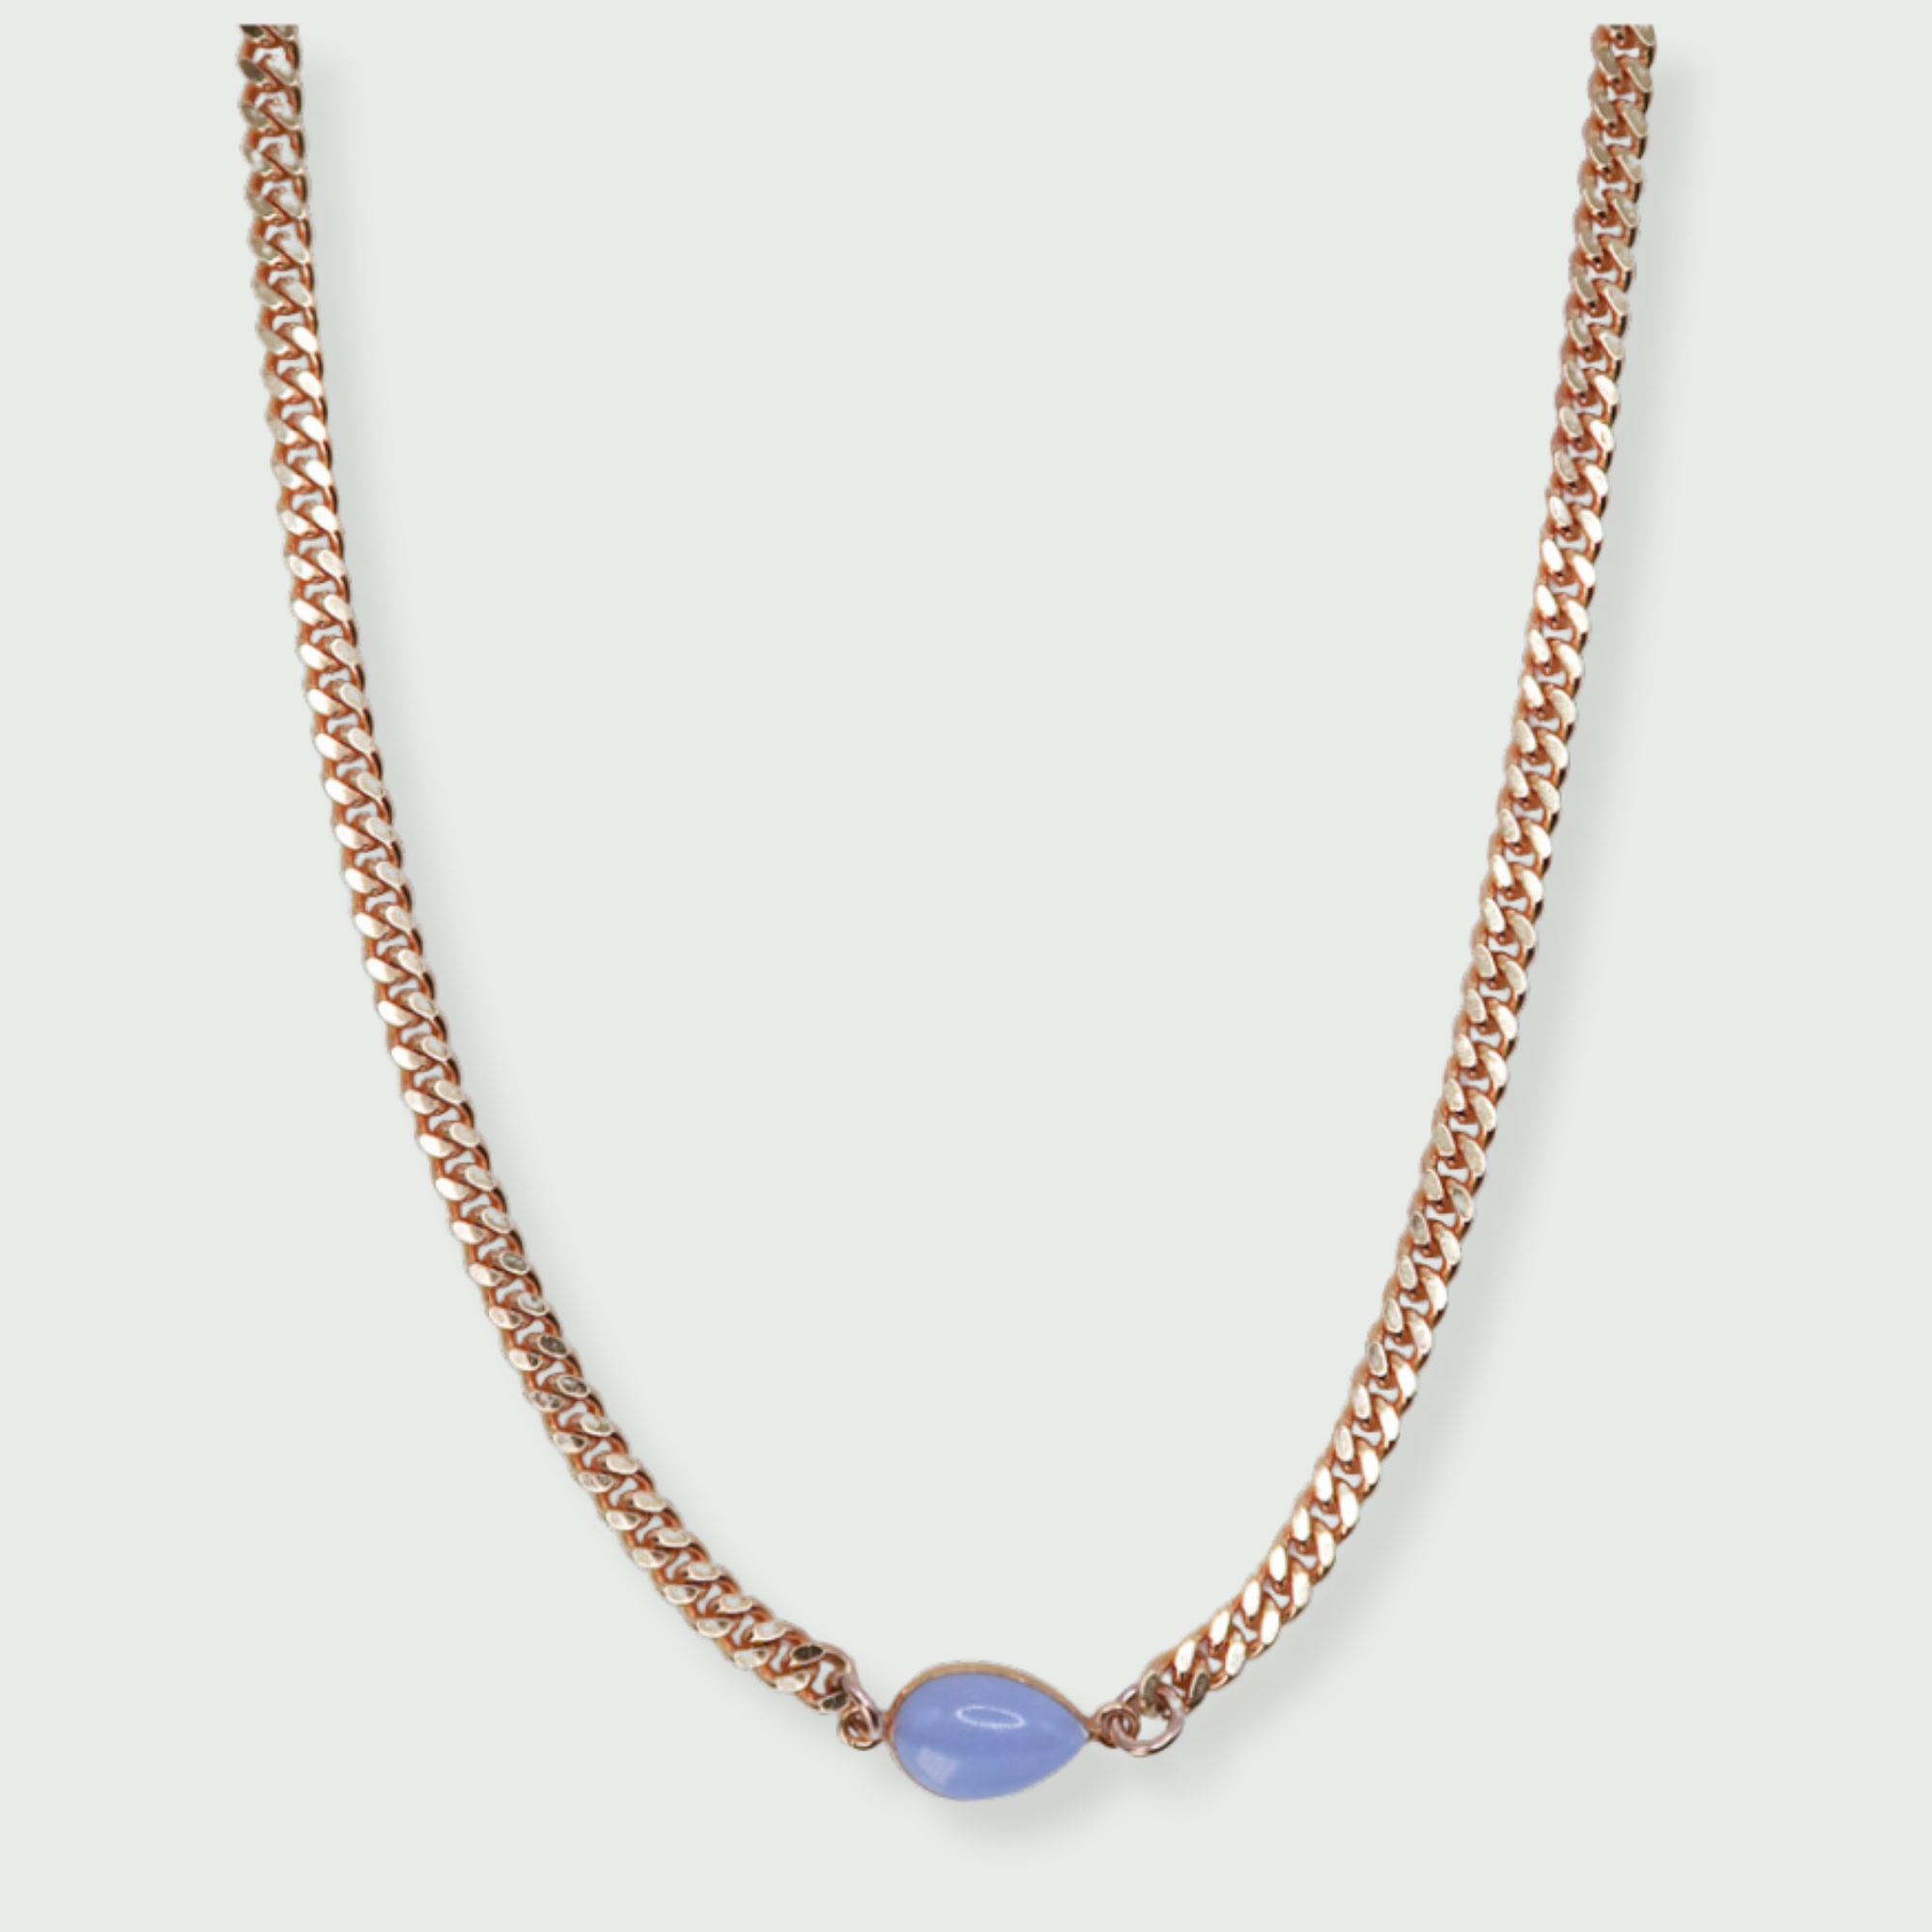 4mm Cuban Curb Chain Necklace with Blue Lace Agate